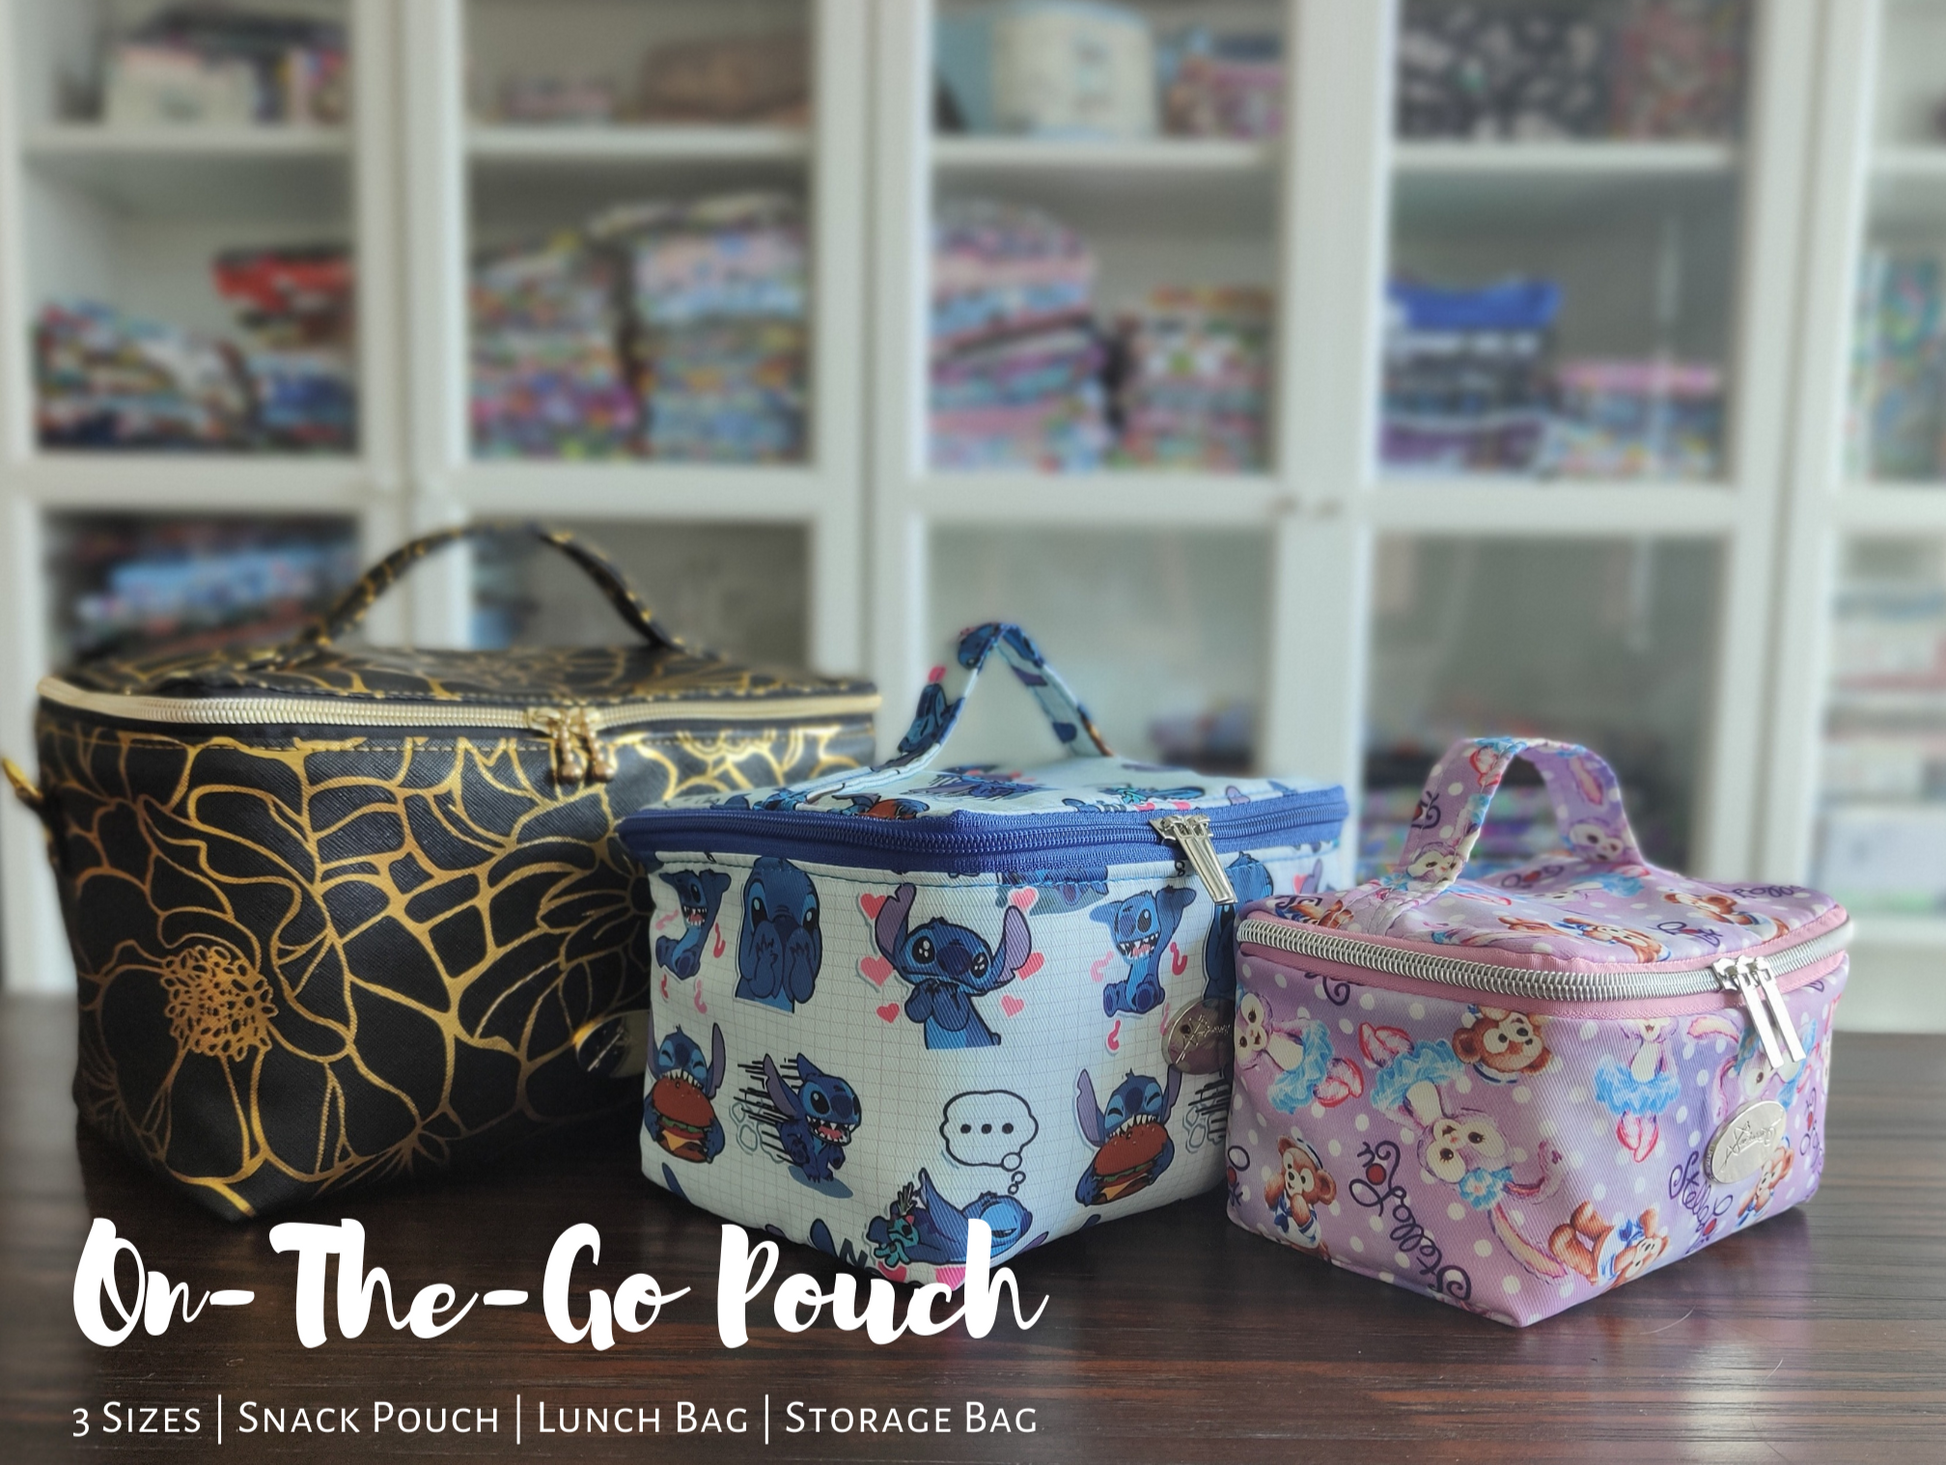 On-The-Go Pouch – Sewfisticated Craft Designs